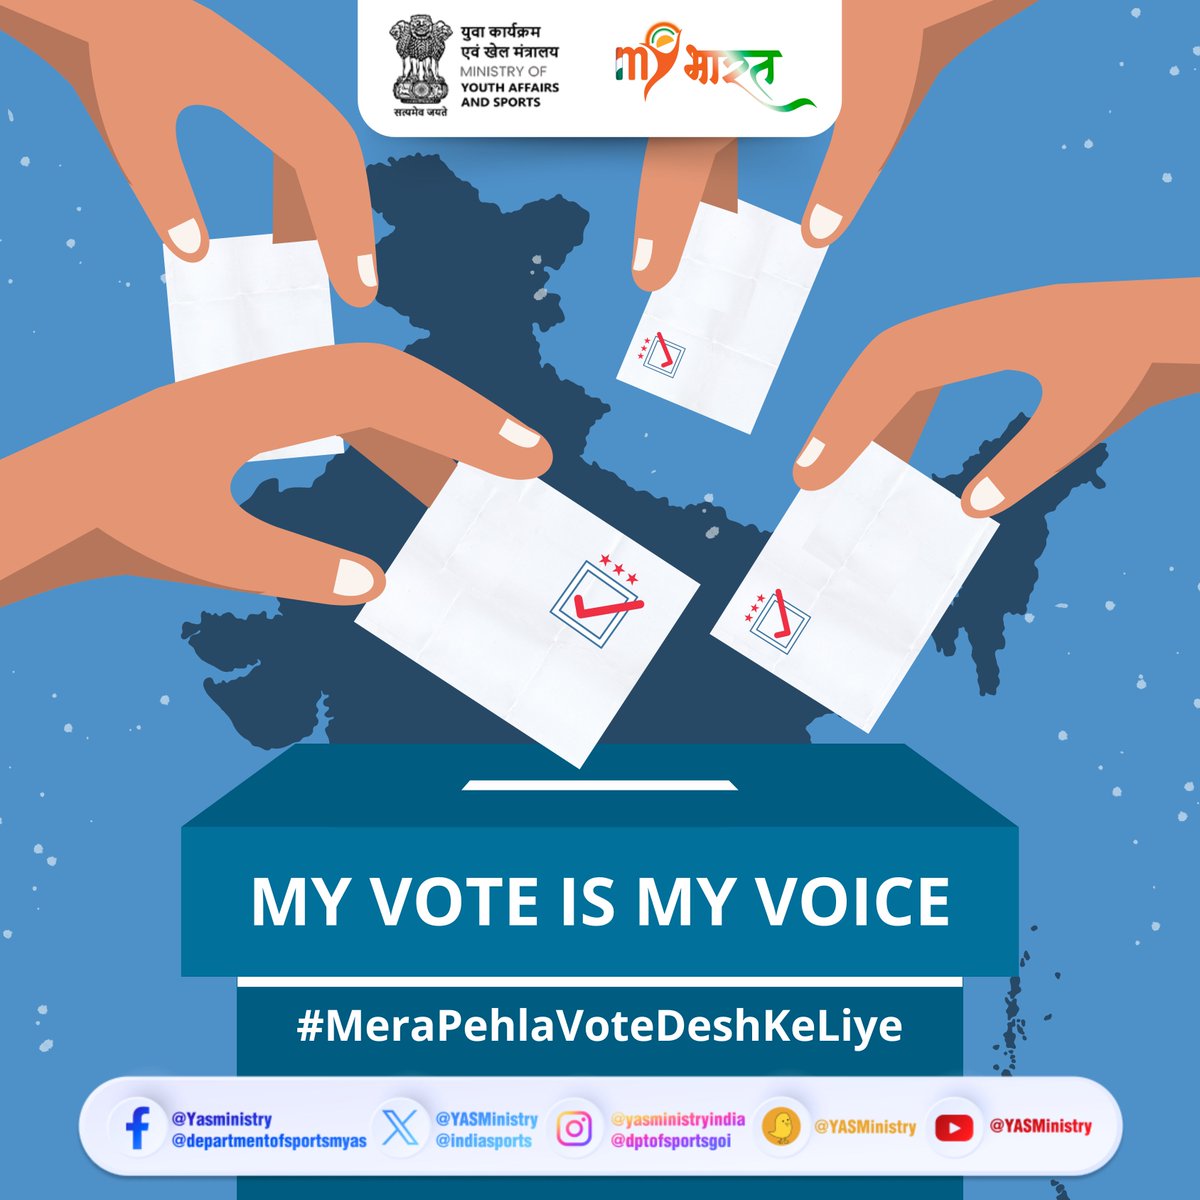 Your vote is your choice! Let's fulfil our duties as informed citizens of India and cast our first vote for the nation. 🇮🇳 #MeraPehlaVoteDeshKeLiye